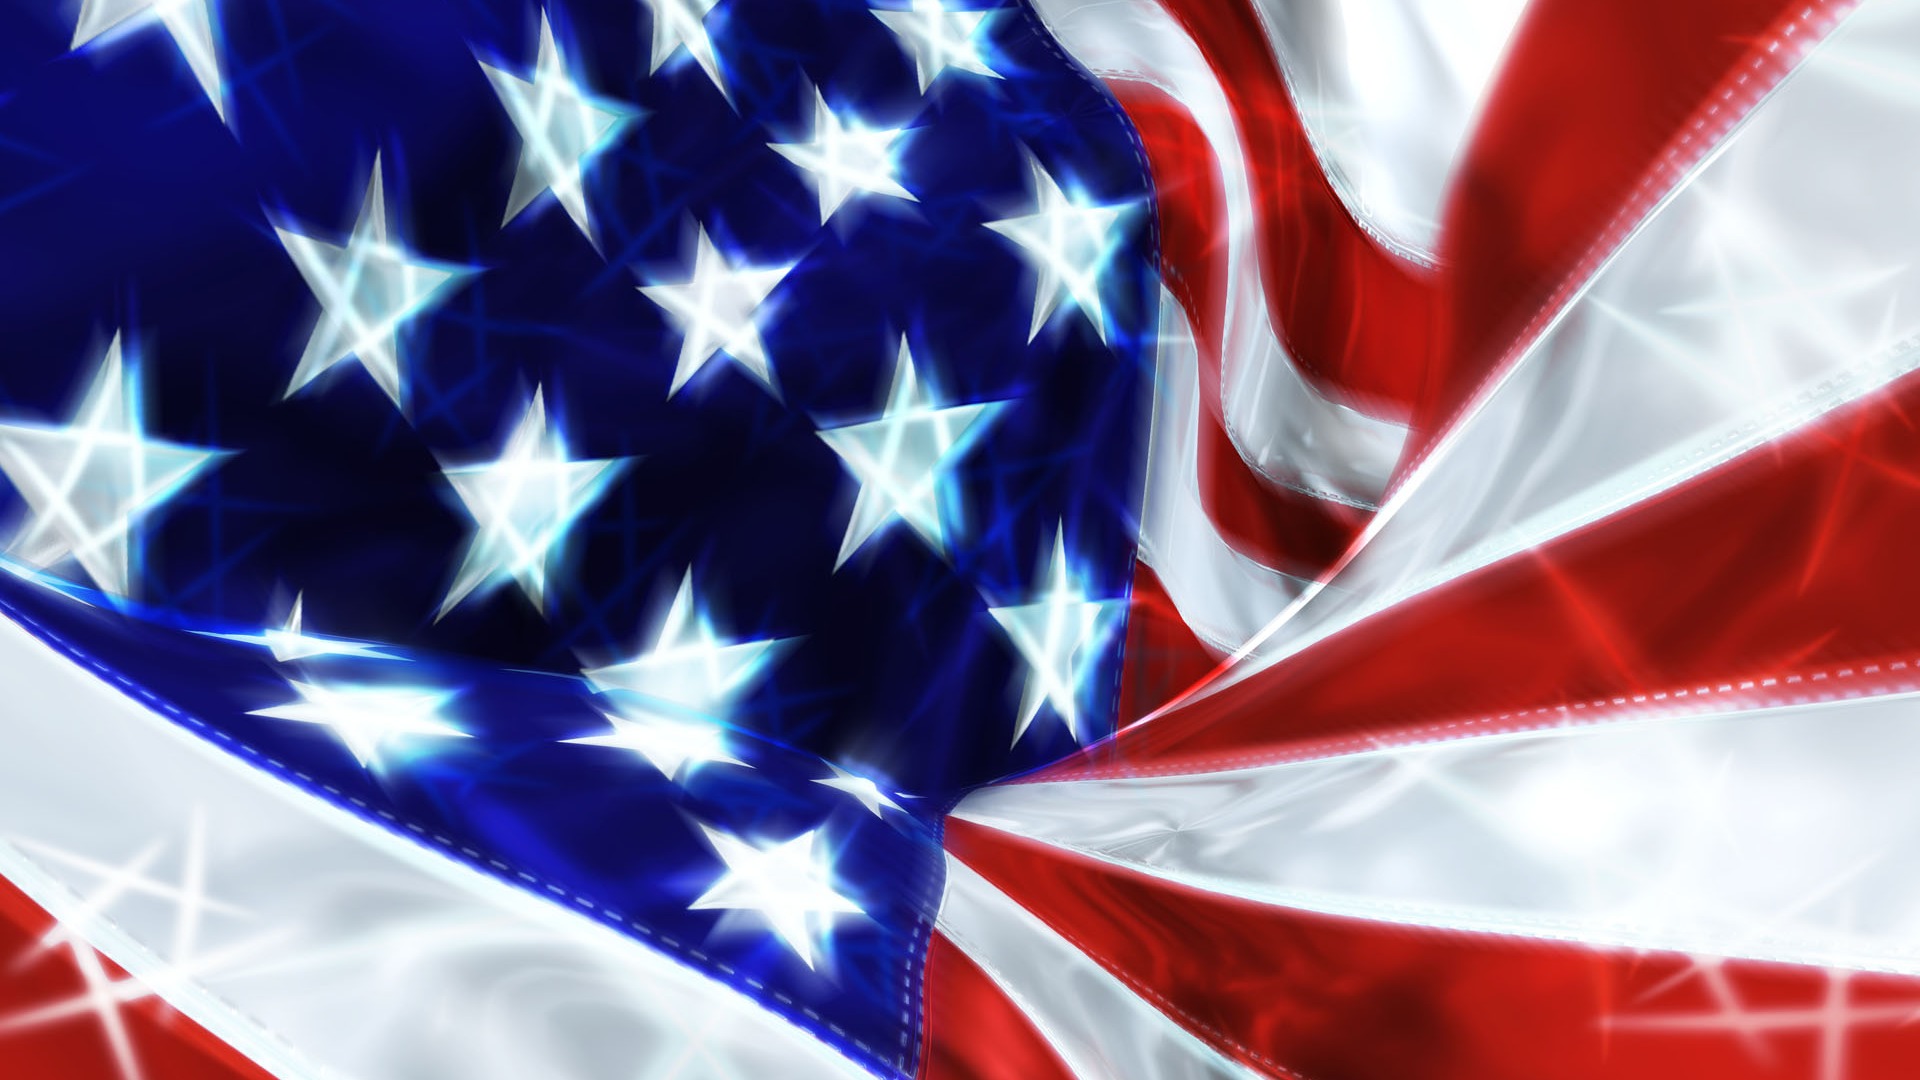 U.S. Independence Day theme wallpaper #4 - 1920x1080